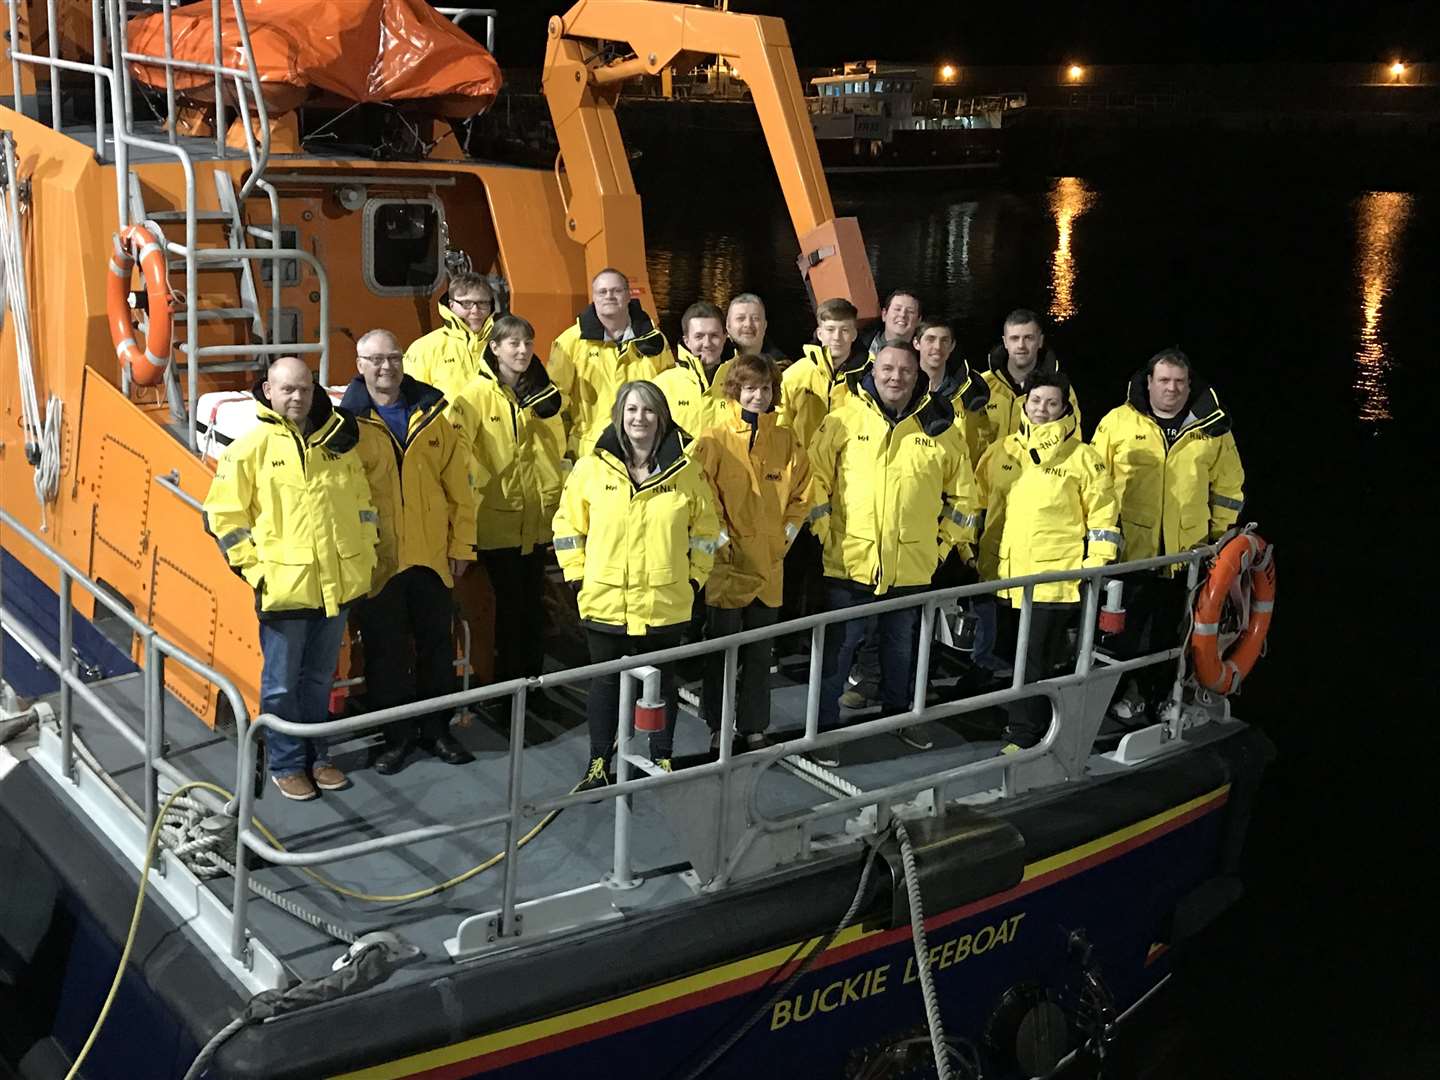 The winners of the 2019 emergency services/armed forces hero award was the RNLI Buckie lifeboat crew.